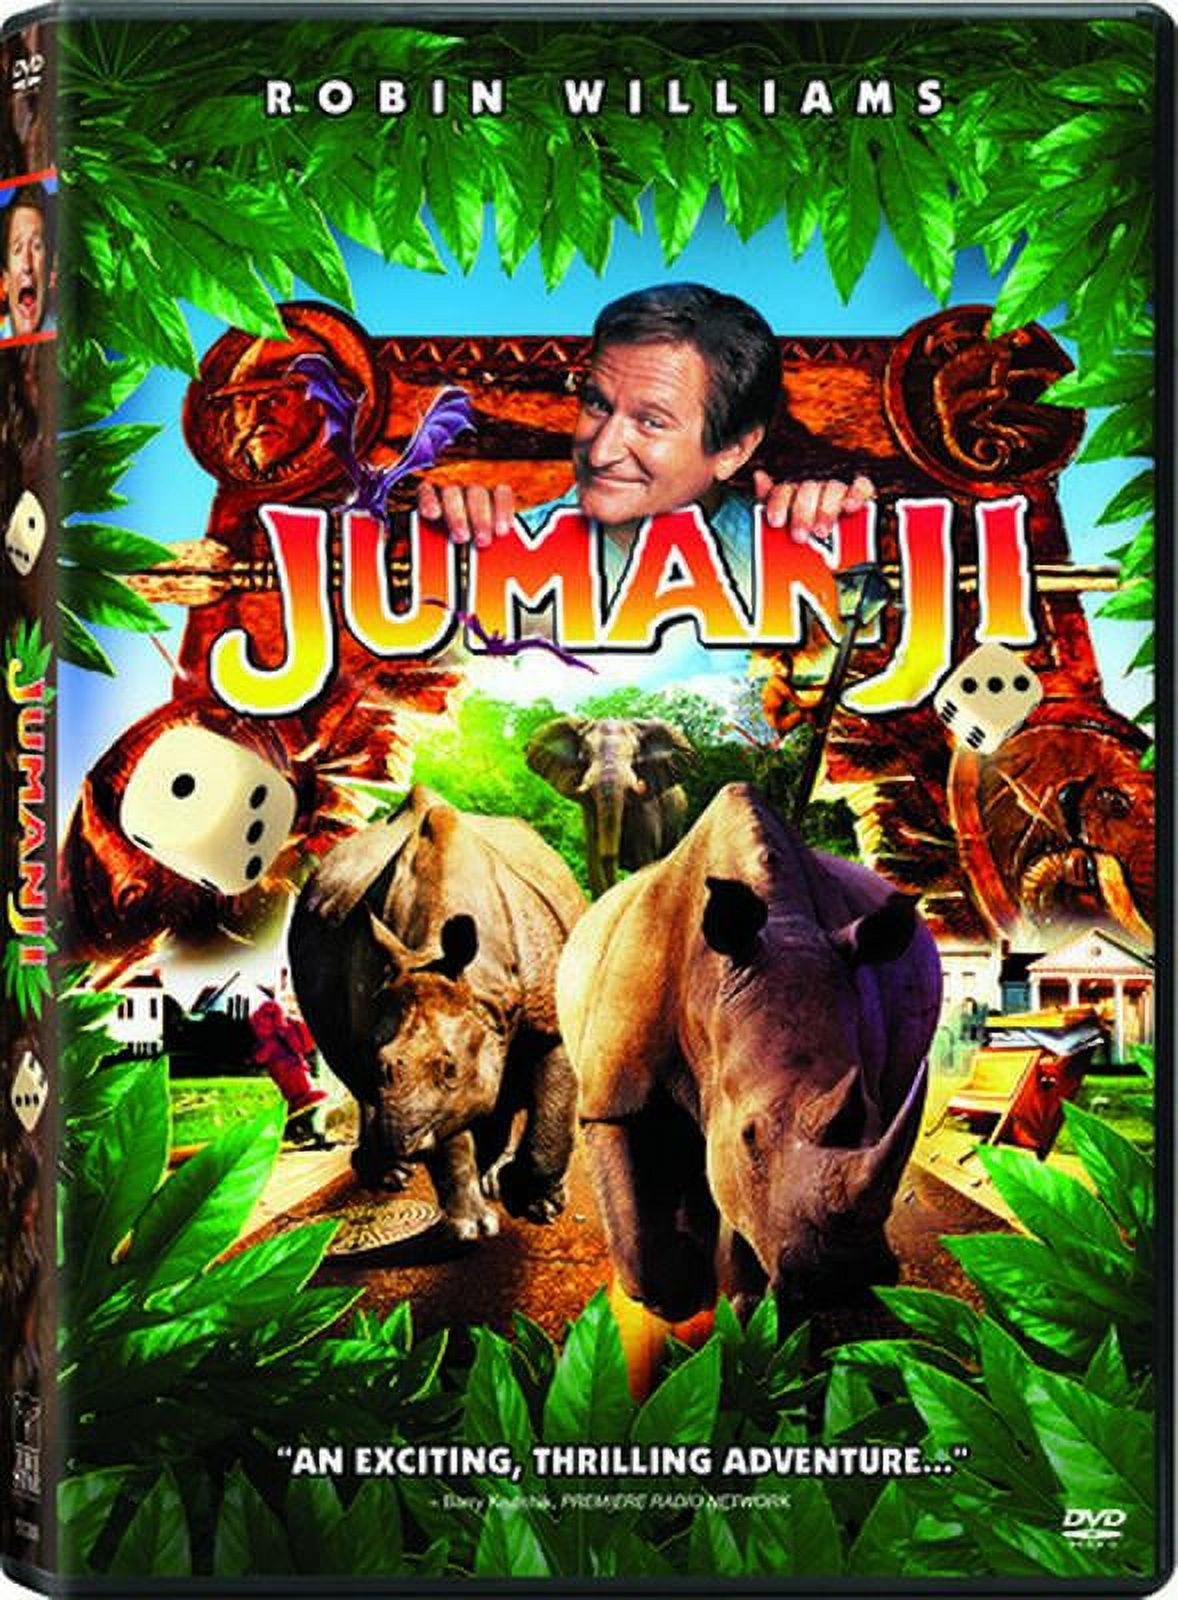 Jumanji (Special Edition DVD Sony Pictures) - image 1 of 7